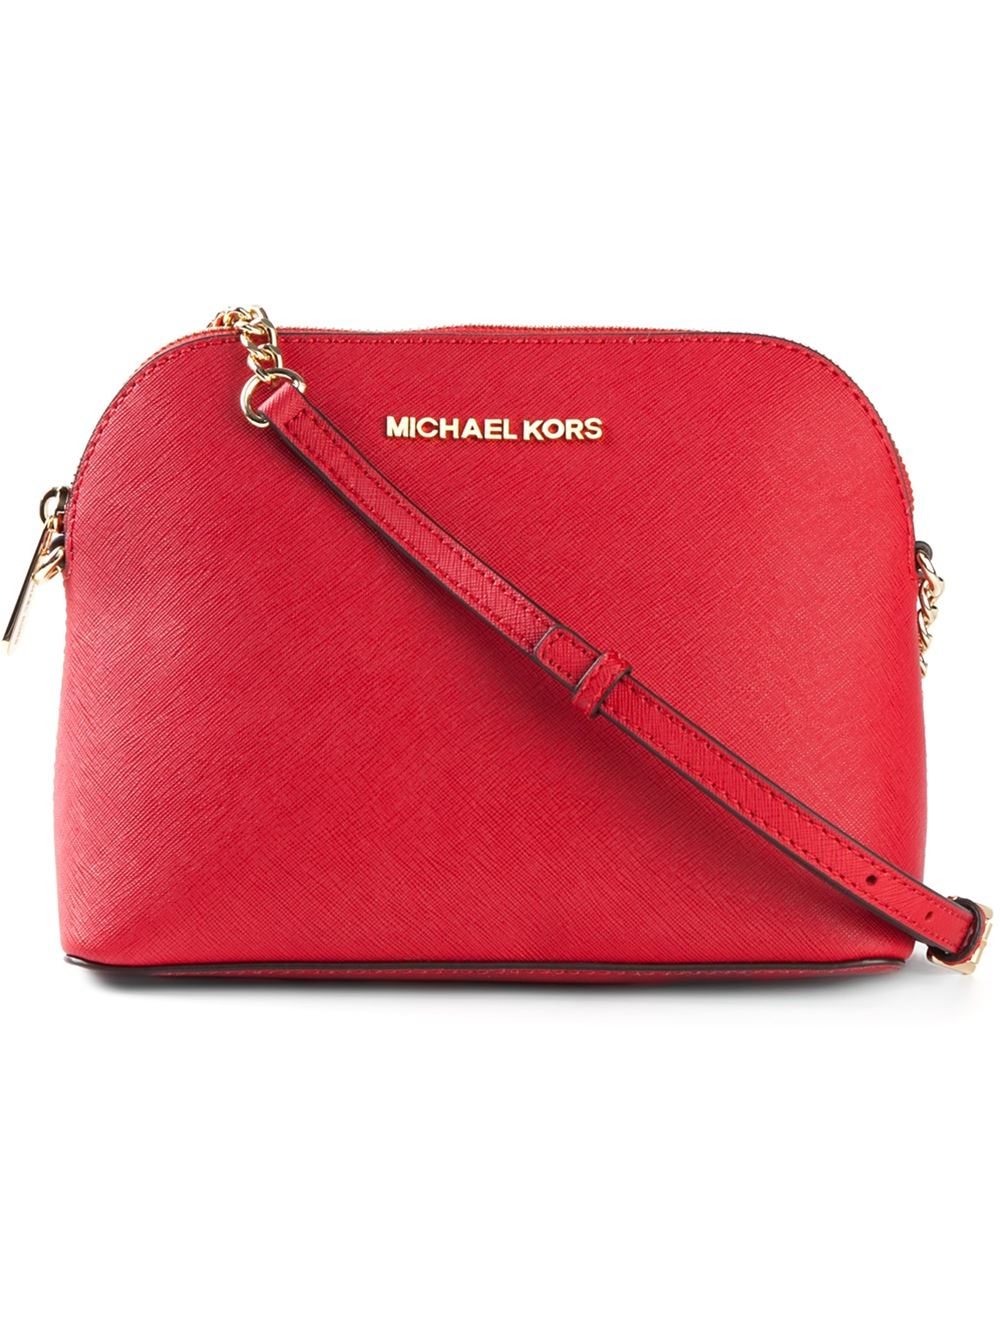 Michael Kors Cindy Large Calf-Leather Cross-Body Bag in Red - Lyst